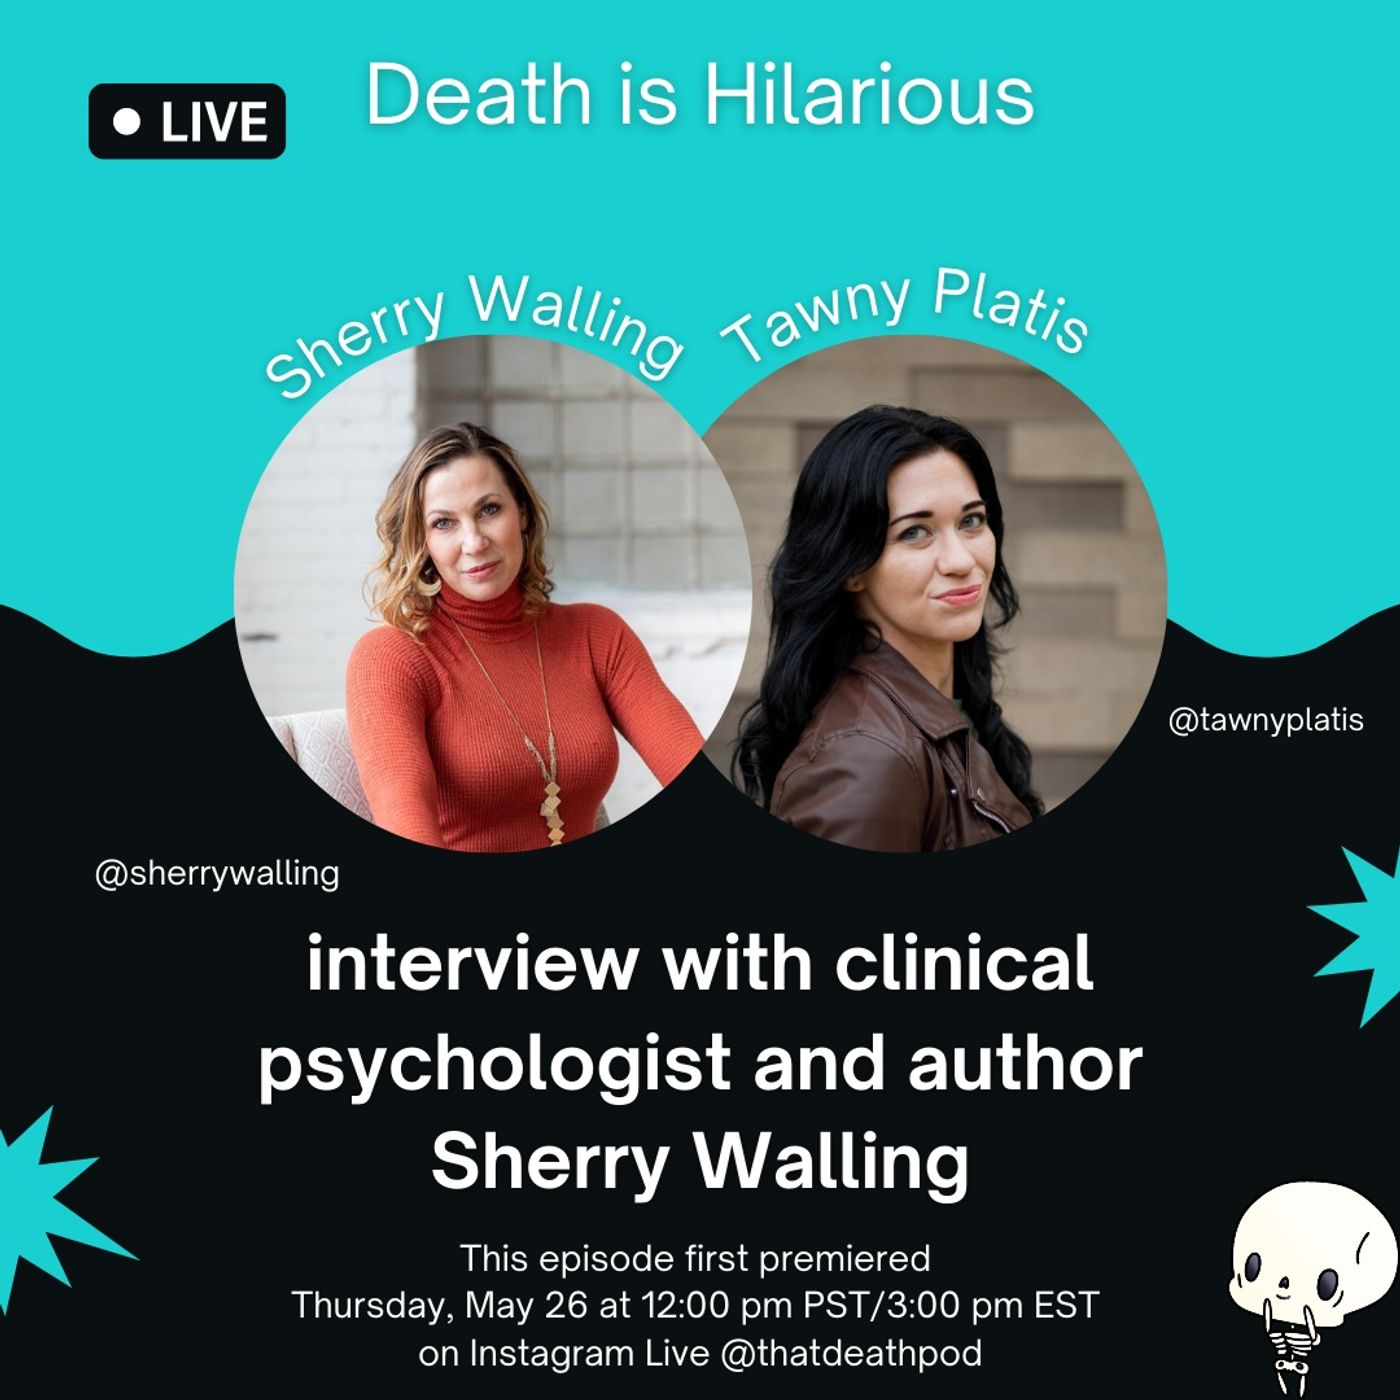 Interview with clinical psychologist + author Sherry Walling